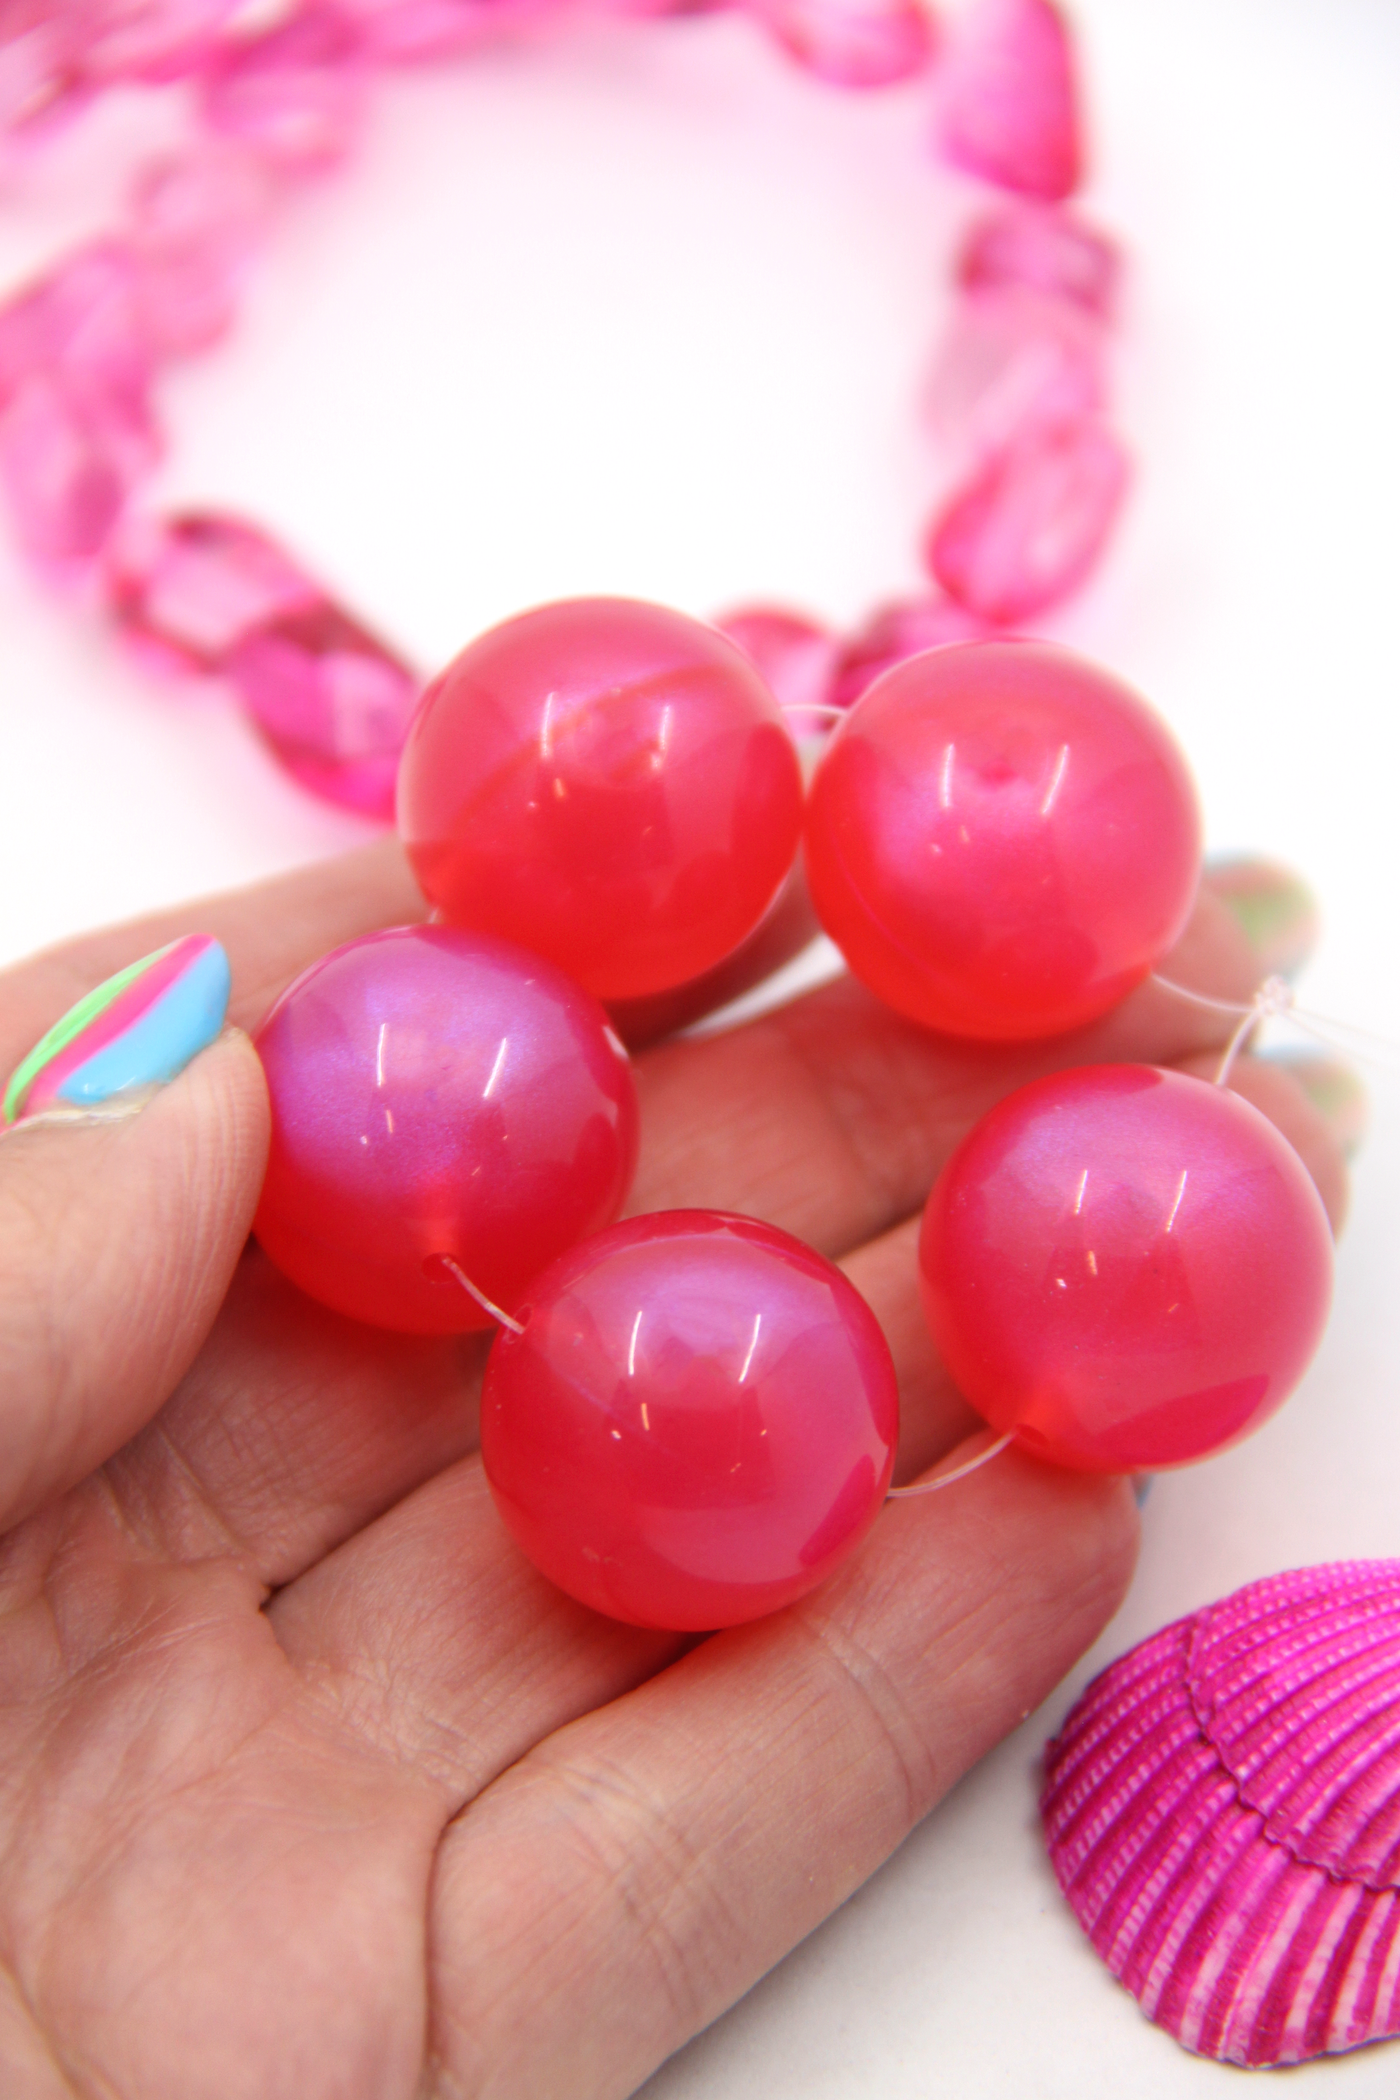 Raspberry Shimmer Barbiecore Resin Round Beads, 22mm, 5 Beads for making pretty in pink jewelry